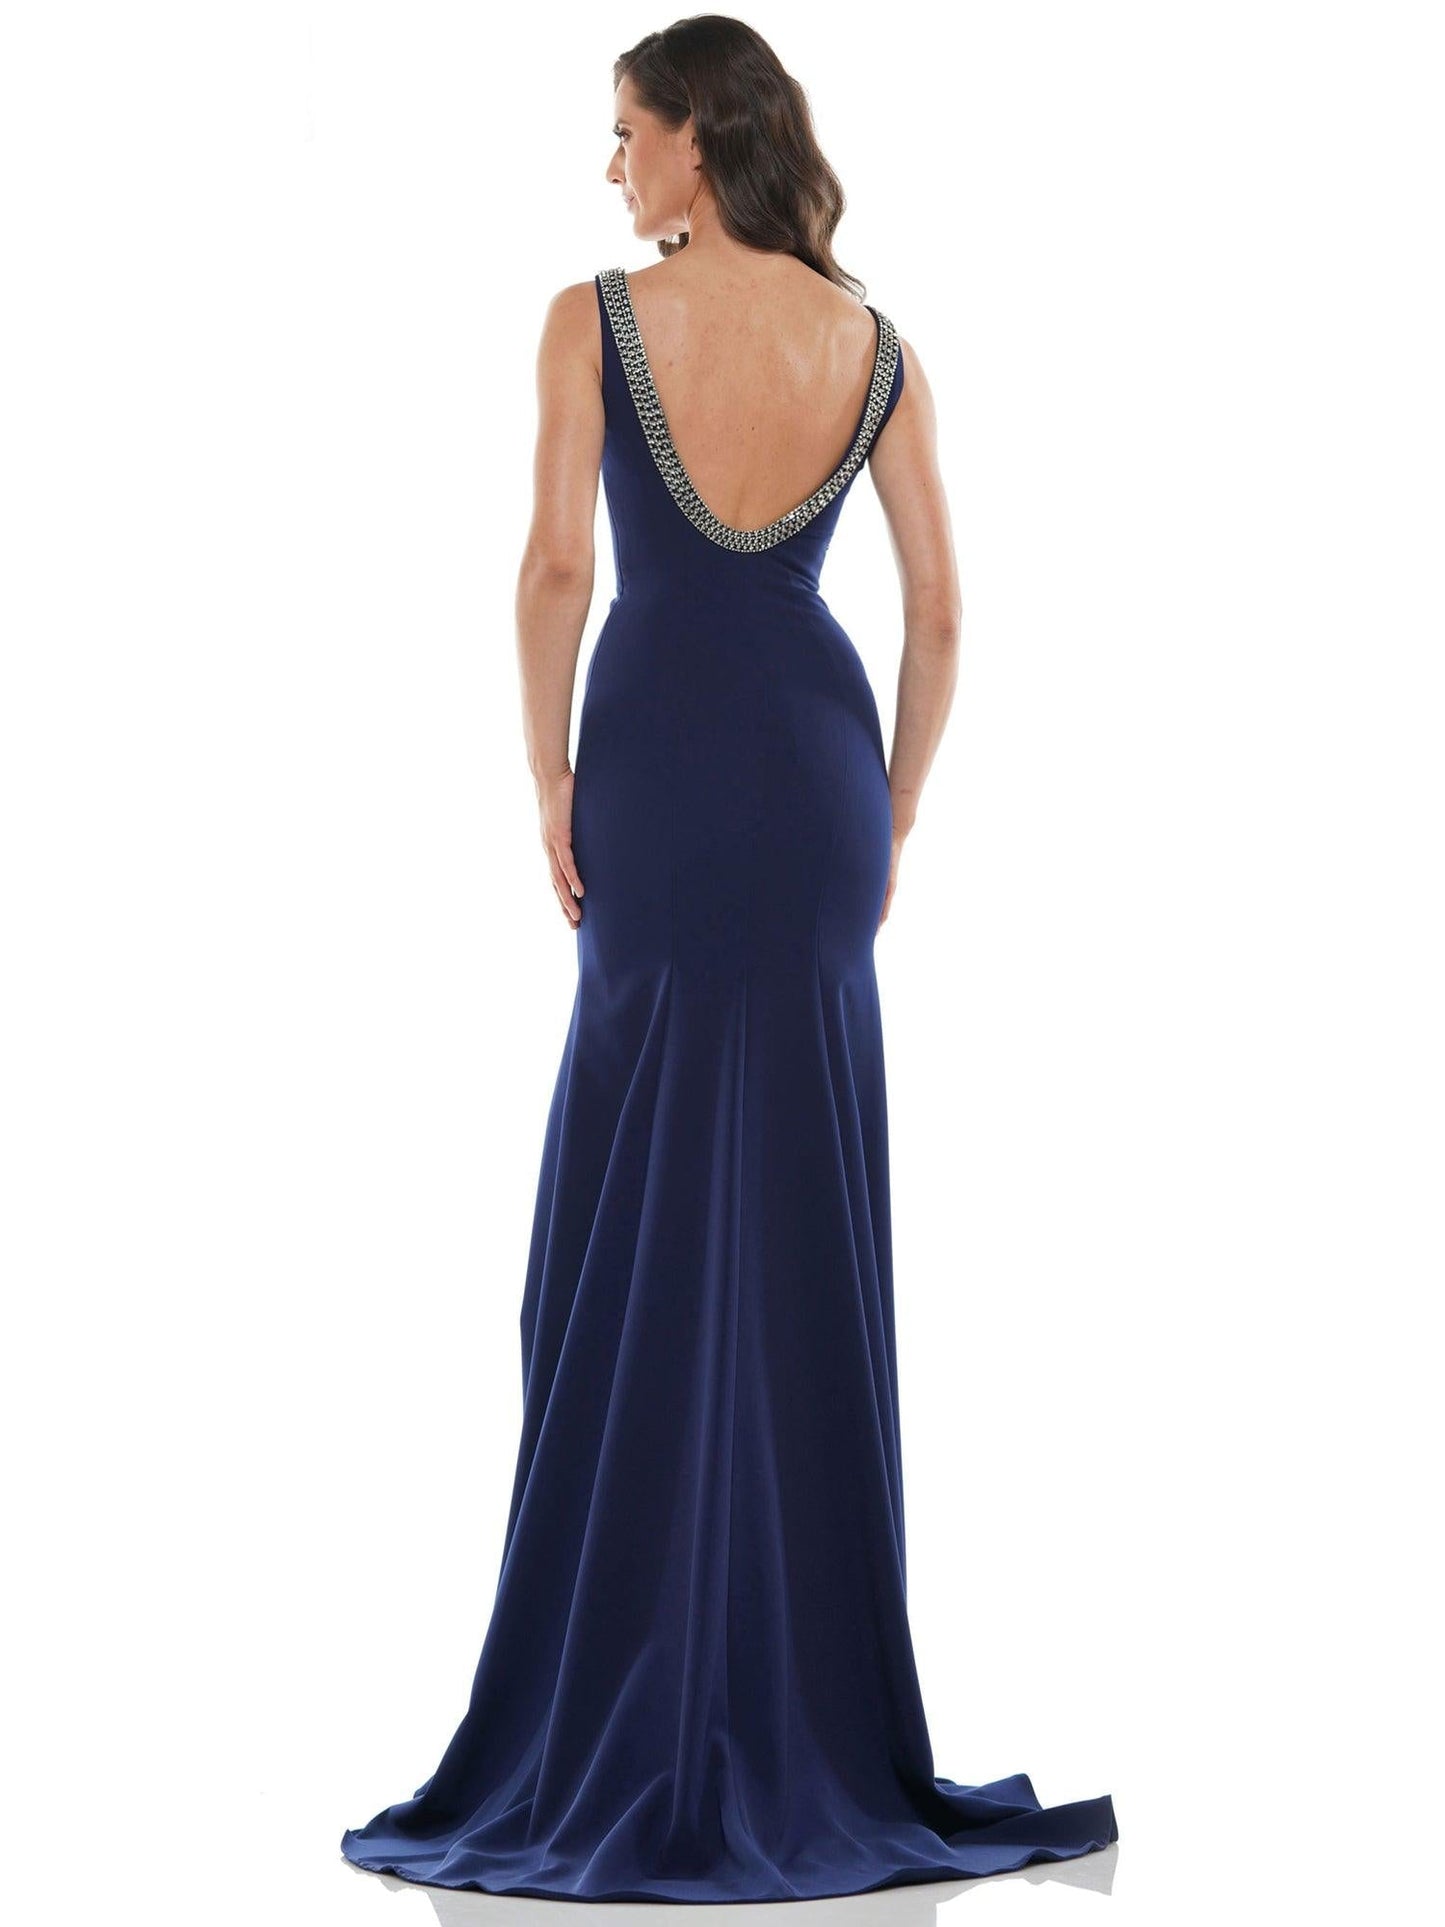 Marsoni Long Mother of the Bride Formal Dress 140 - The Dress Outlet